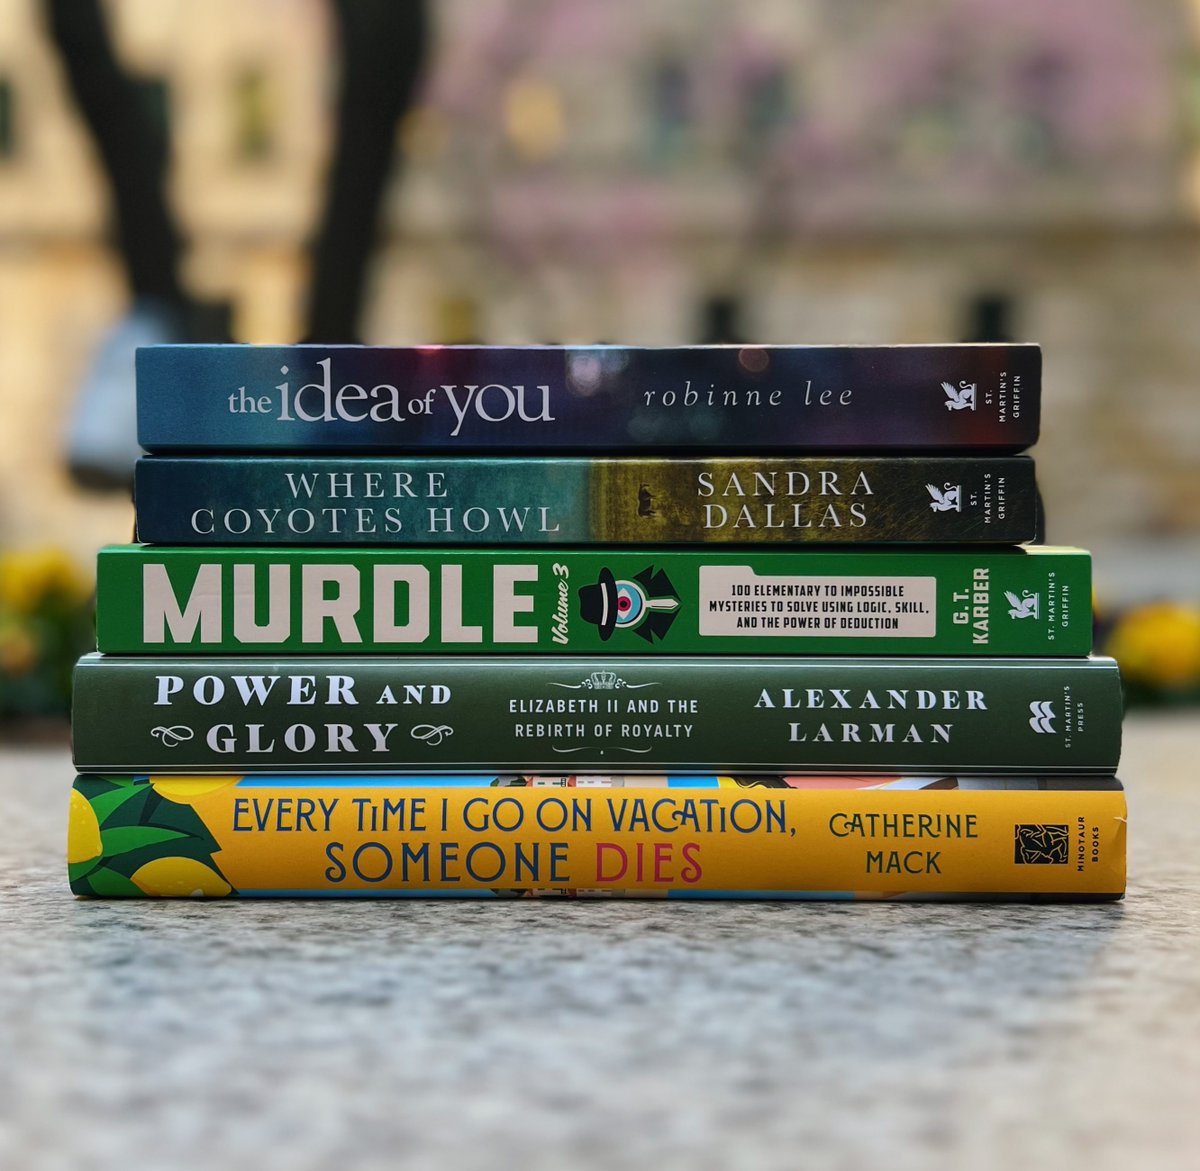 Time for new books! Check out what's new for today's #PubDay: 👑 POWER AND GLORY by Alexander Larman 💙 THE IDEA OF YOU by Robinne Lee 🏜 WHERE COYOTES HOWL by Sandra Dallas 🏖️EVERY TIME I GO ON VACATION, SOMEONE DIES by Catherine Mack 🔎 MURDLE: VOLUME 3 by G. T. Karber